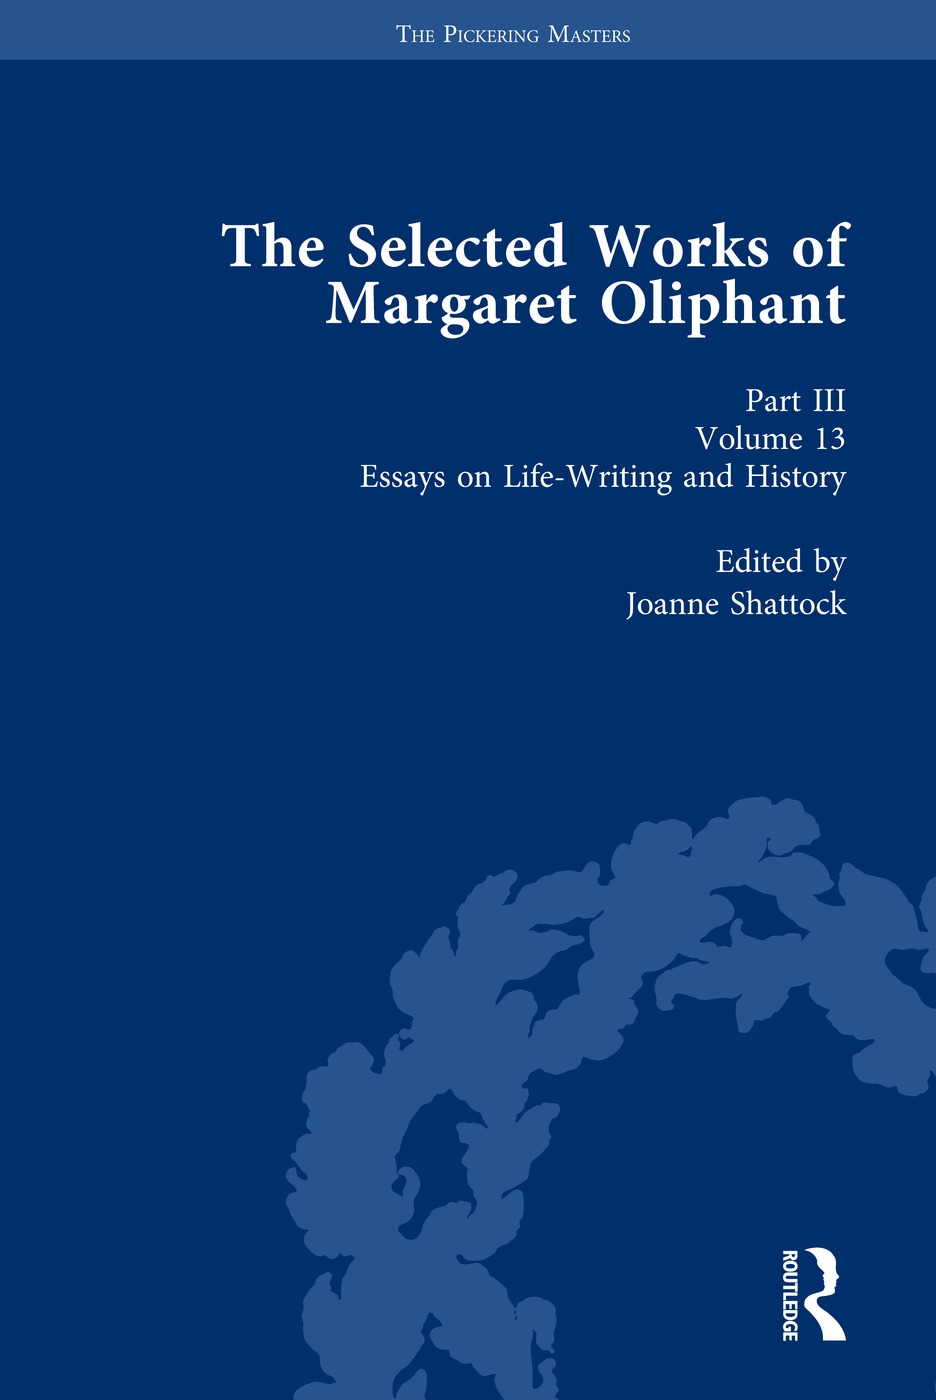 The Selected Works of Margaret Oliphant, Part III Volume 13: Essays on Life-Writing and History